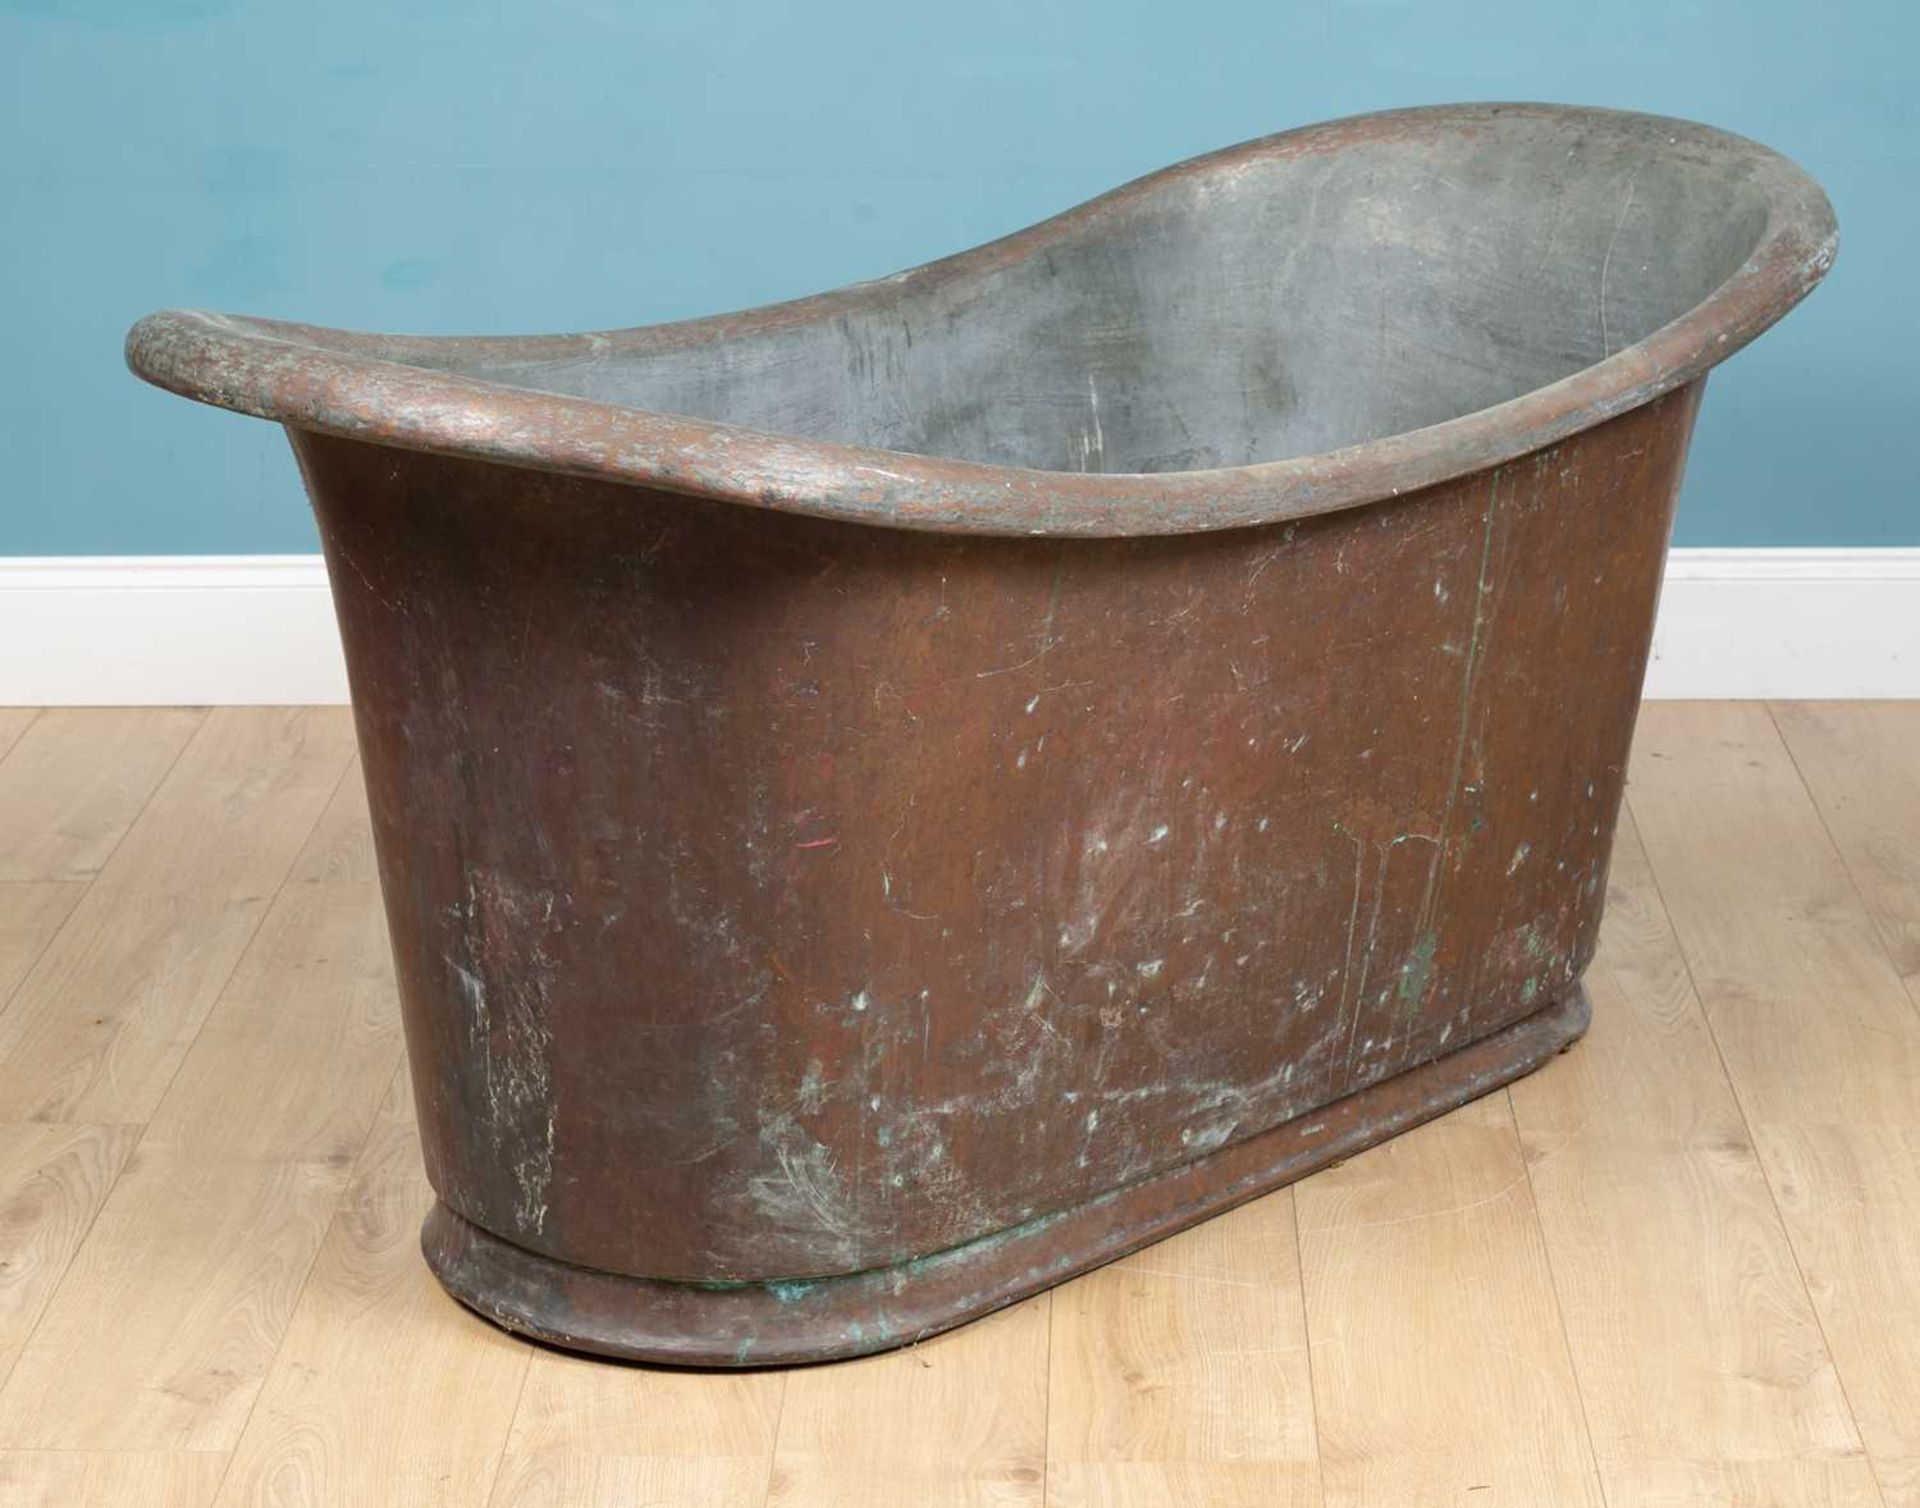 An antique 19th century roll top patinated copper bath - Image 3 of 3